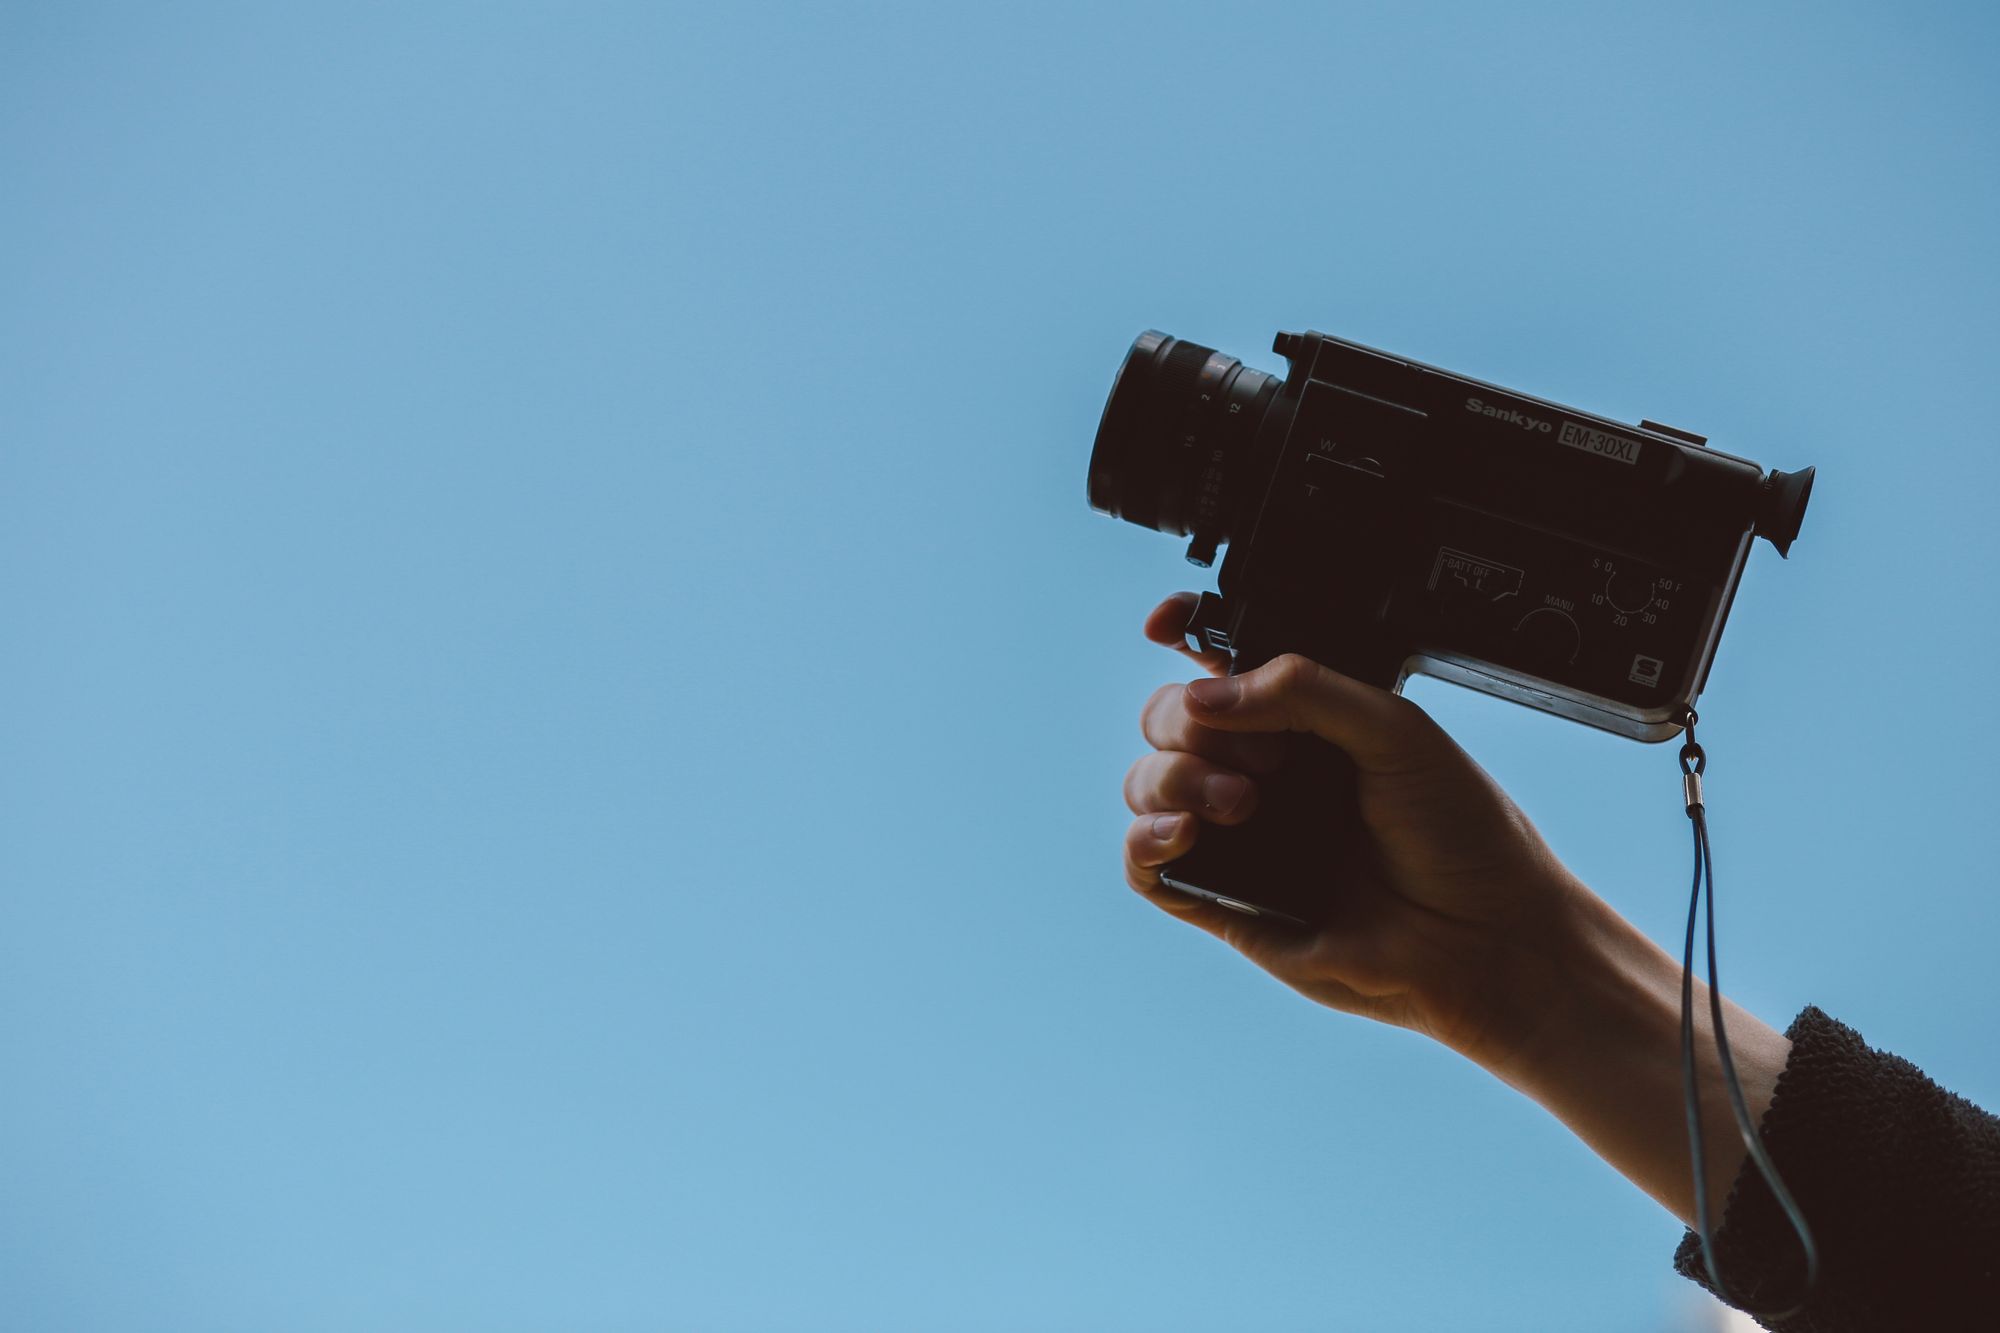 How to Fund Your Film Project or YouTube Channel